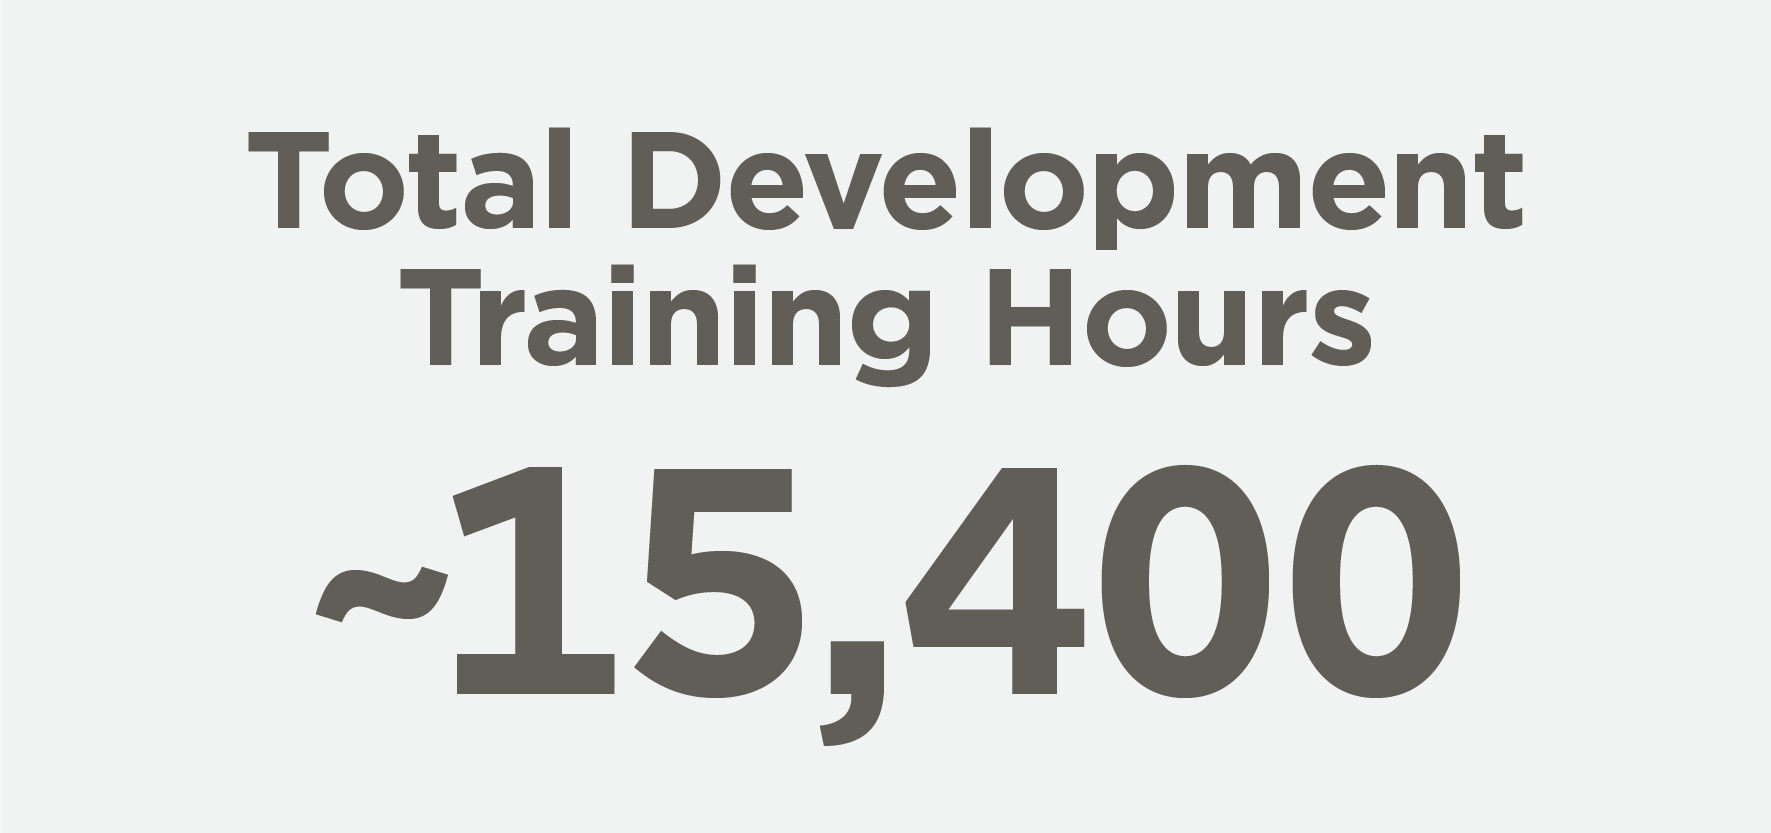 Graphic showing Total Development Training Hours at about 15,400